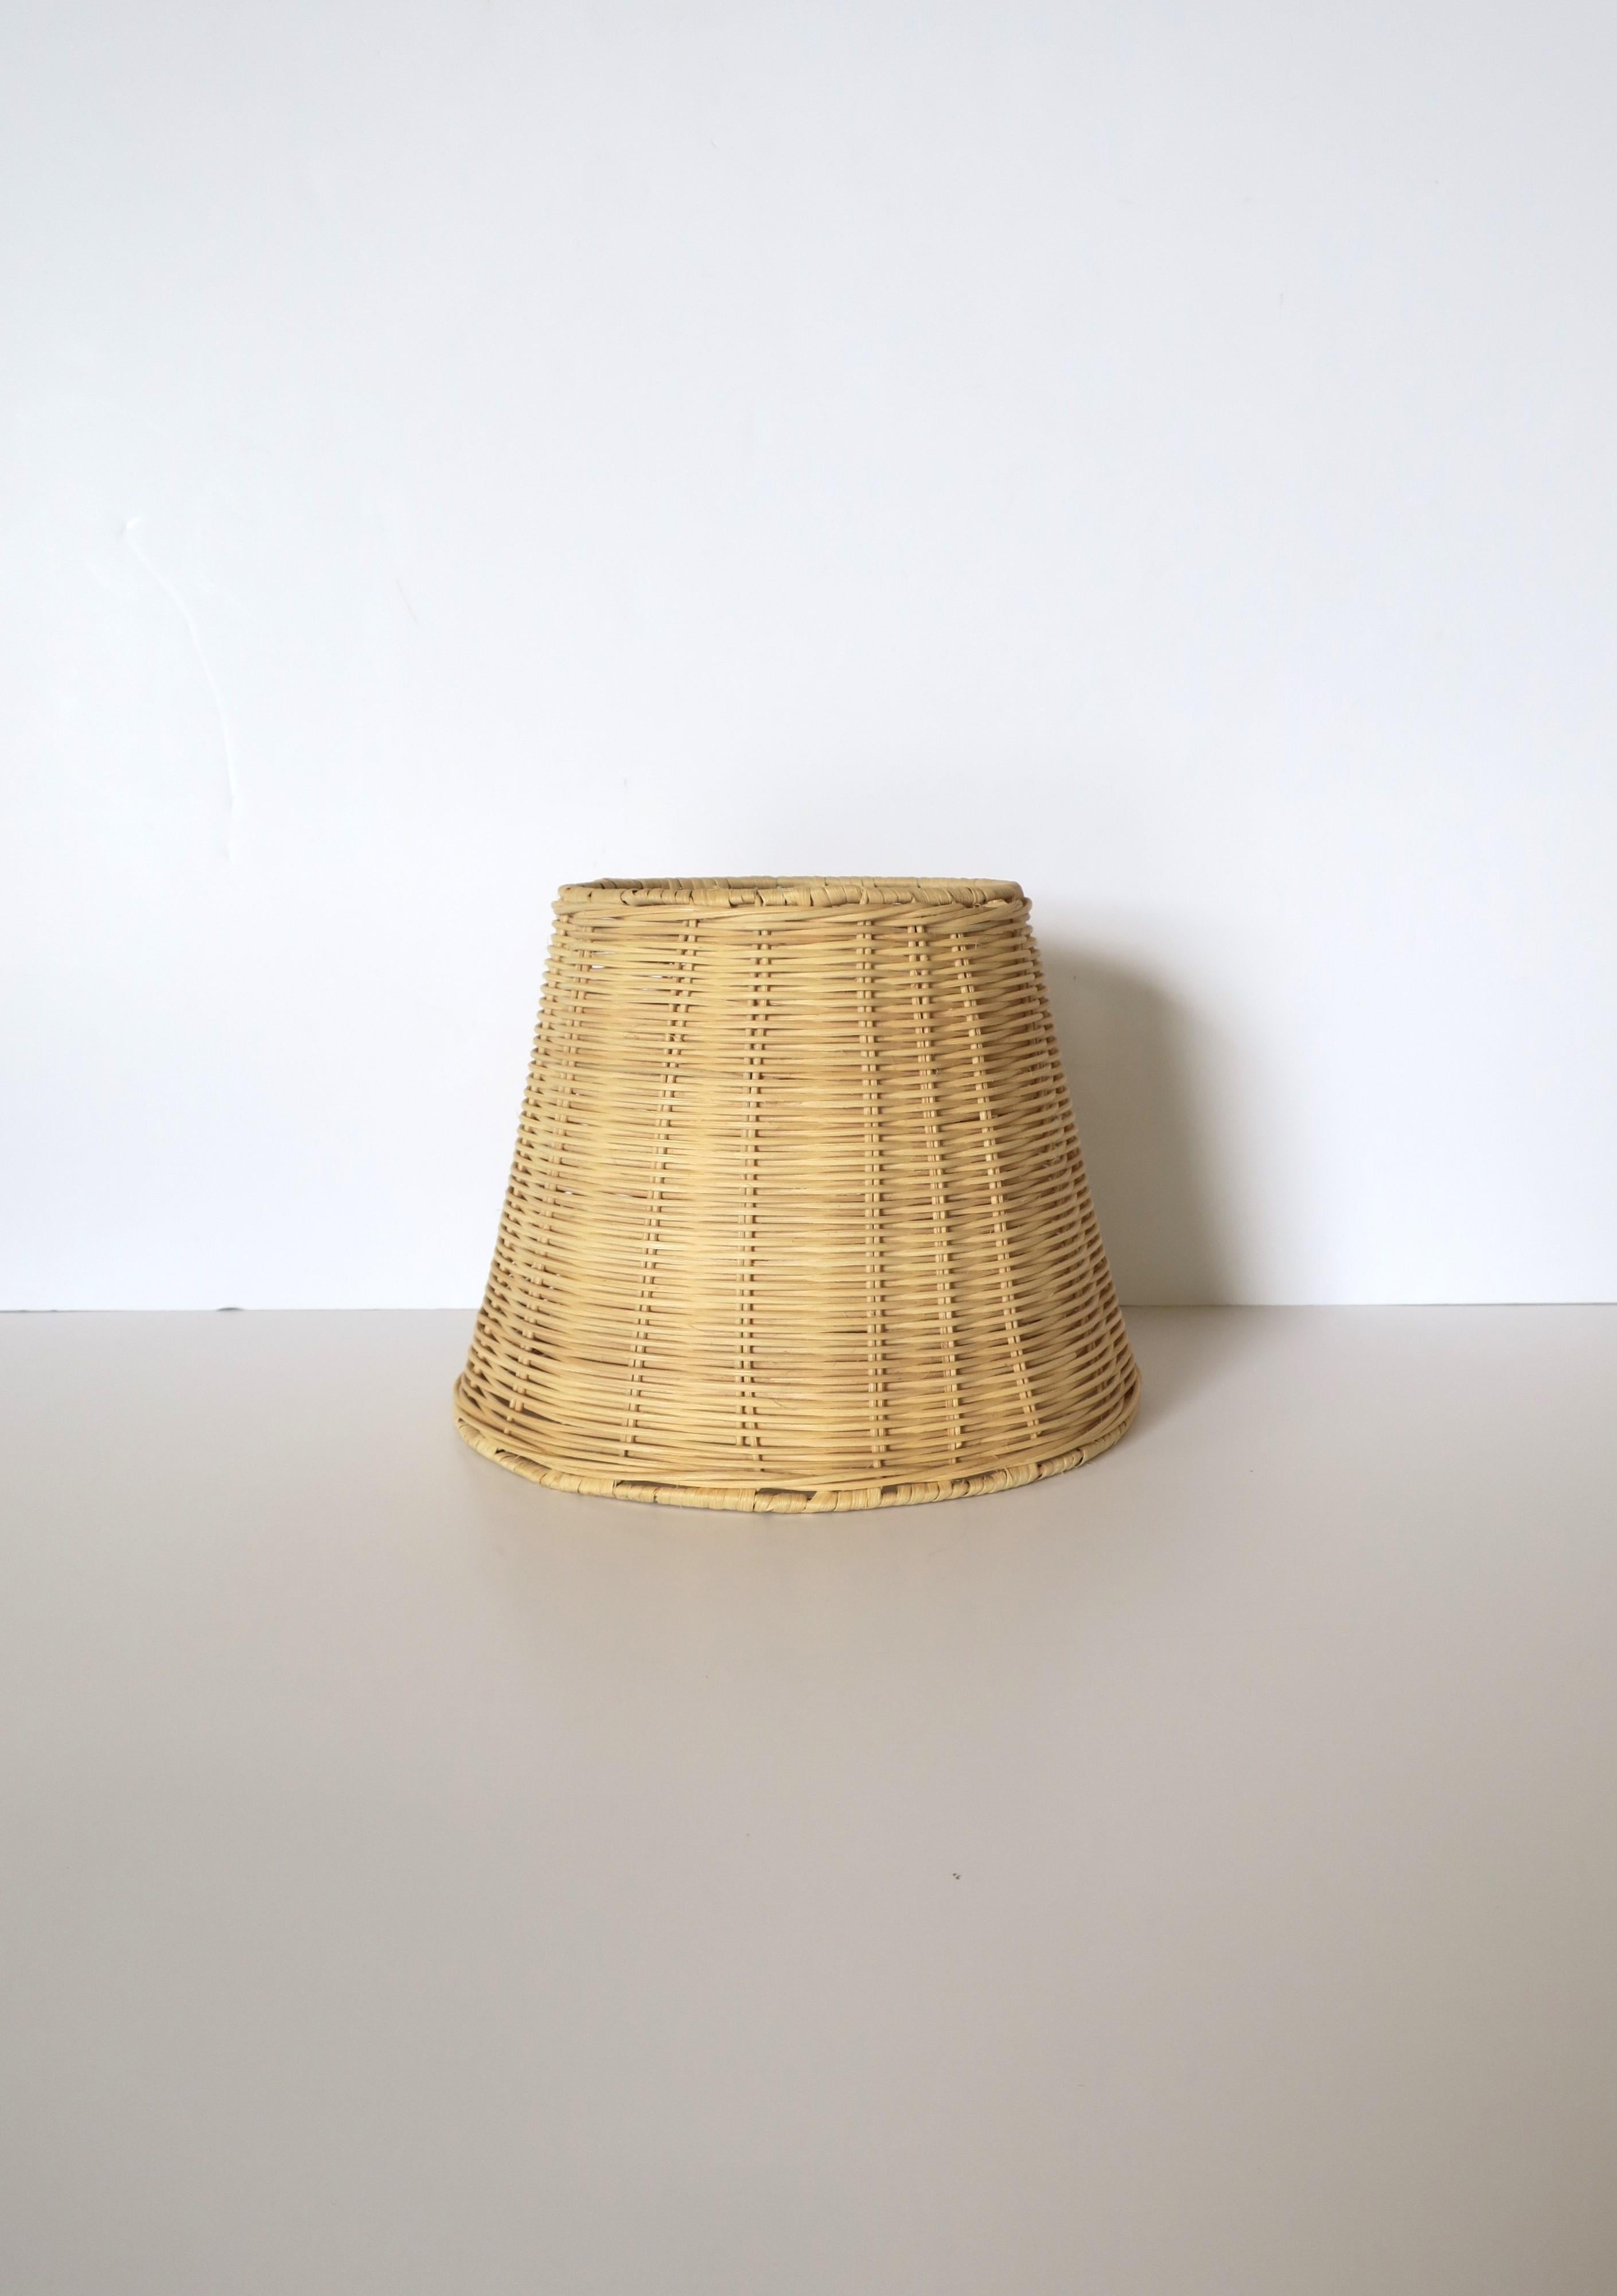 A creamy white or off-white light beige wicker lampshade with coordinating metal hardware. Very good condition as shown in images and video. 

Dimensions: 
8.75